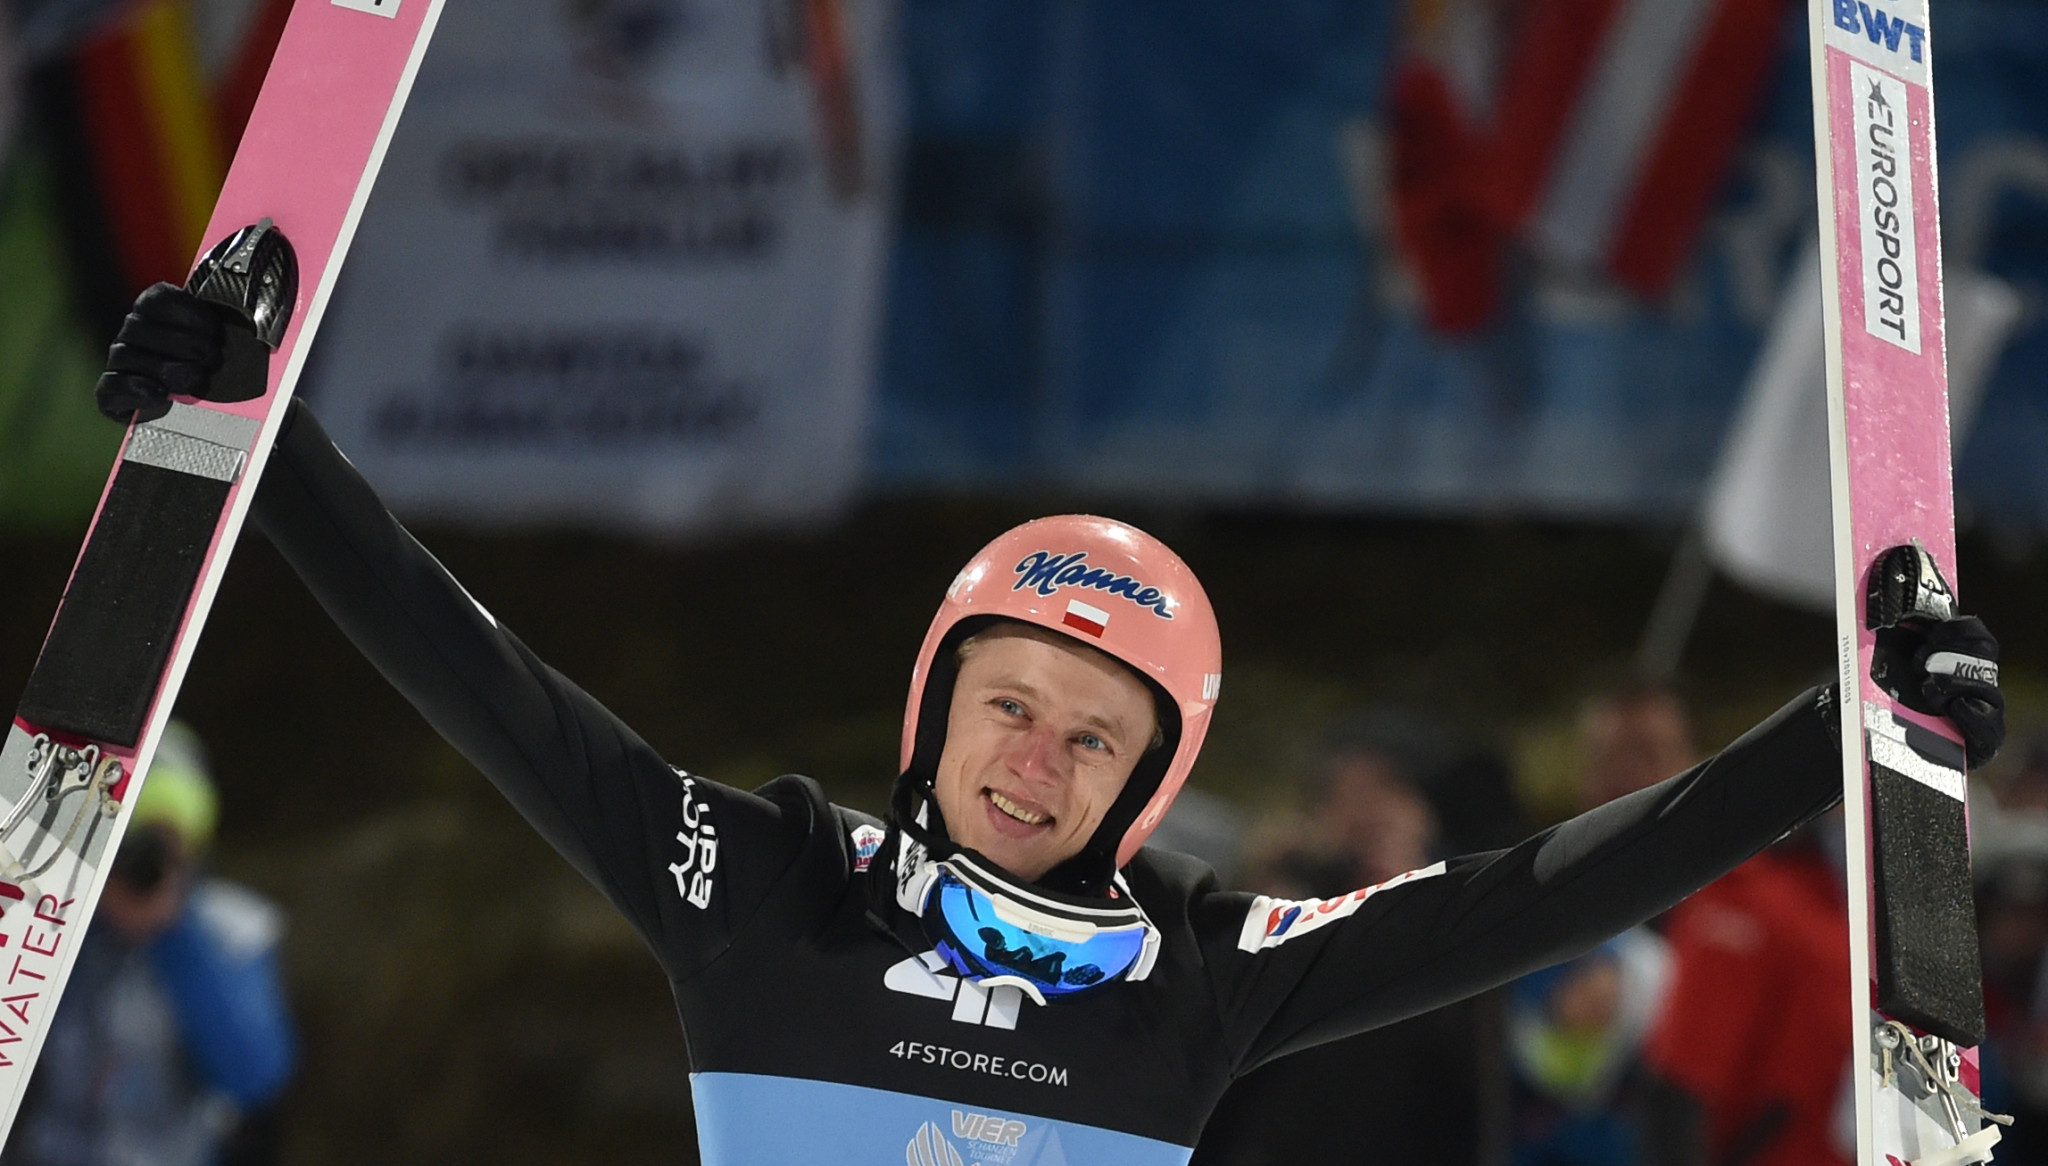 Dawid Kubacki earned a second successive victory at the FIS Ski Jumping World Cup in Titisee-Neustadt ©Getty Images